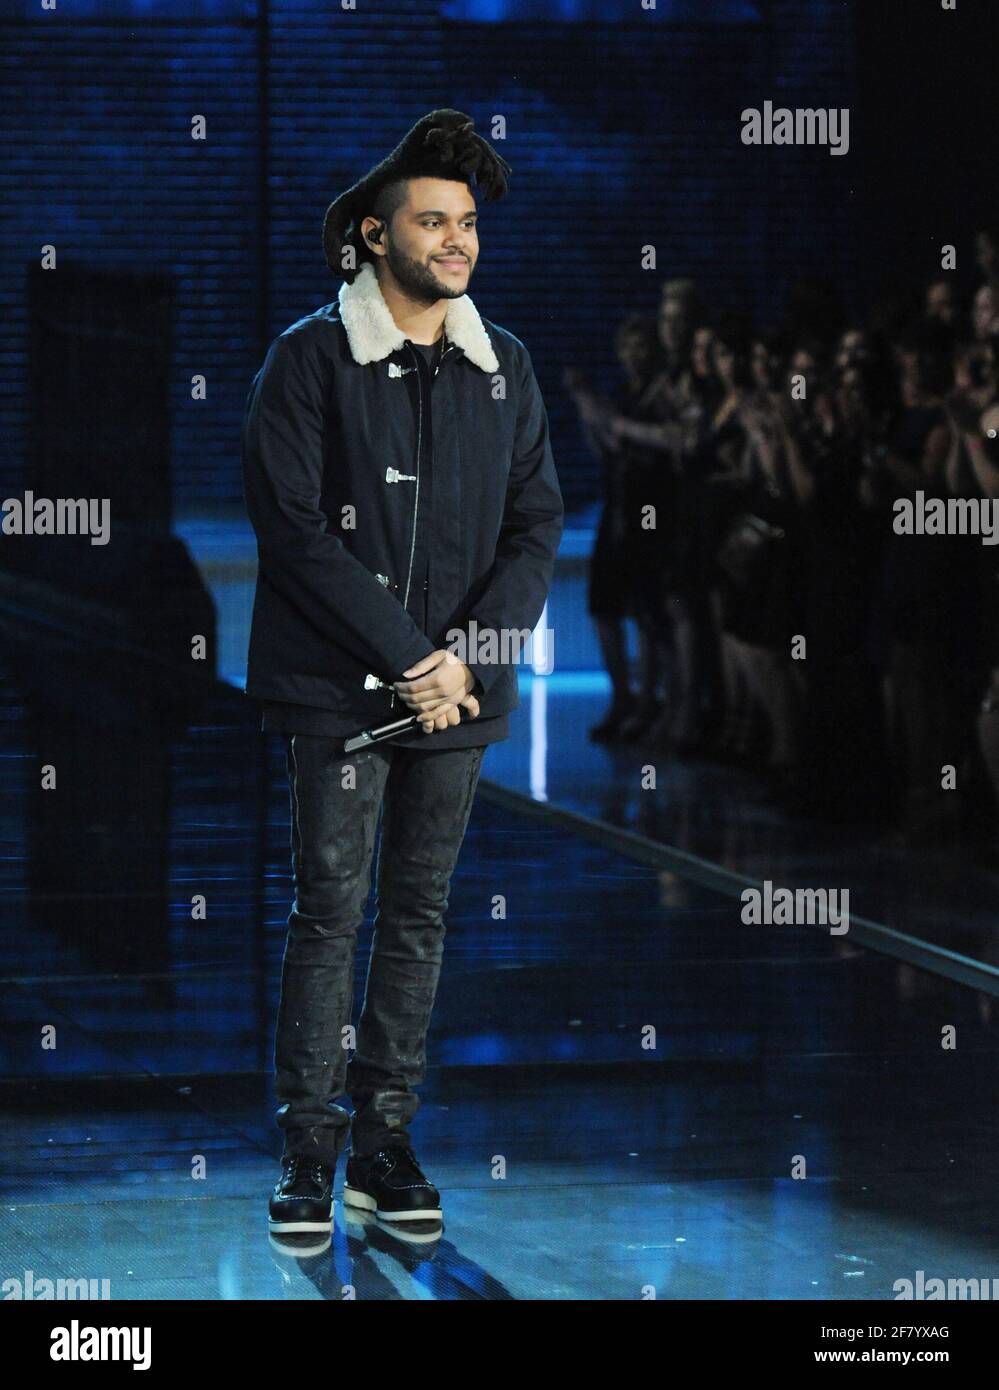 The Weeknd on the runway during the 2015 Victoria's Secret Fashion Show, held at the Lexington Avenue Armory, Tuesday, November 10, 2015 in New York City. Photo by Jennifer Graylock-Graylock.com 917-519-7666 Stock Photo